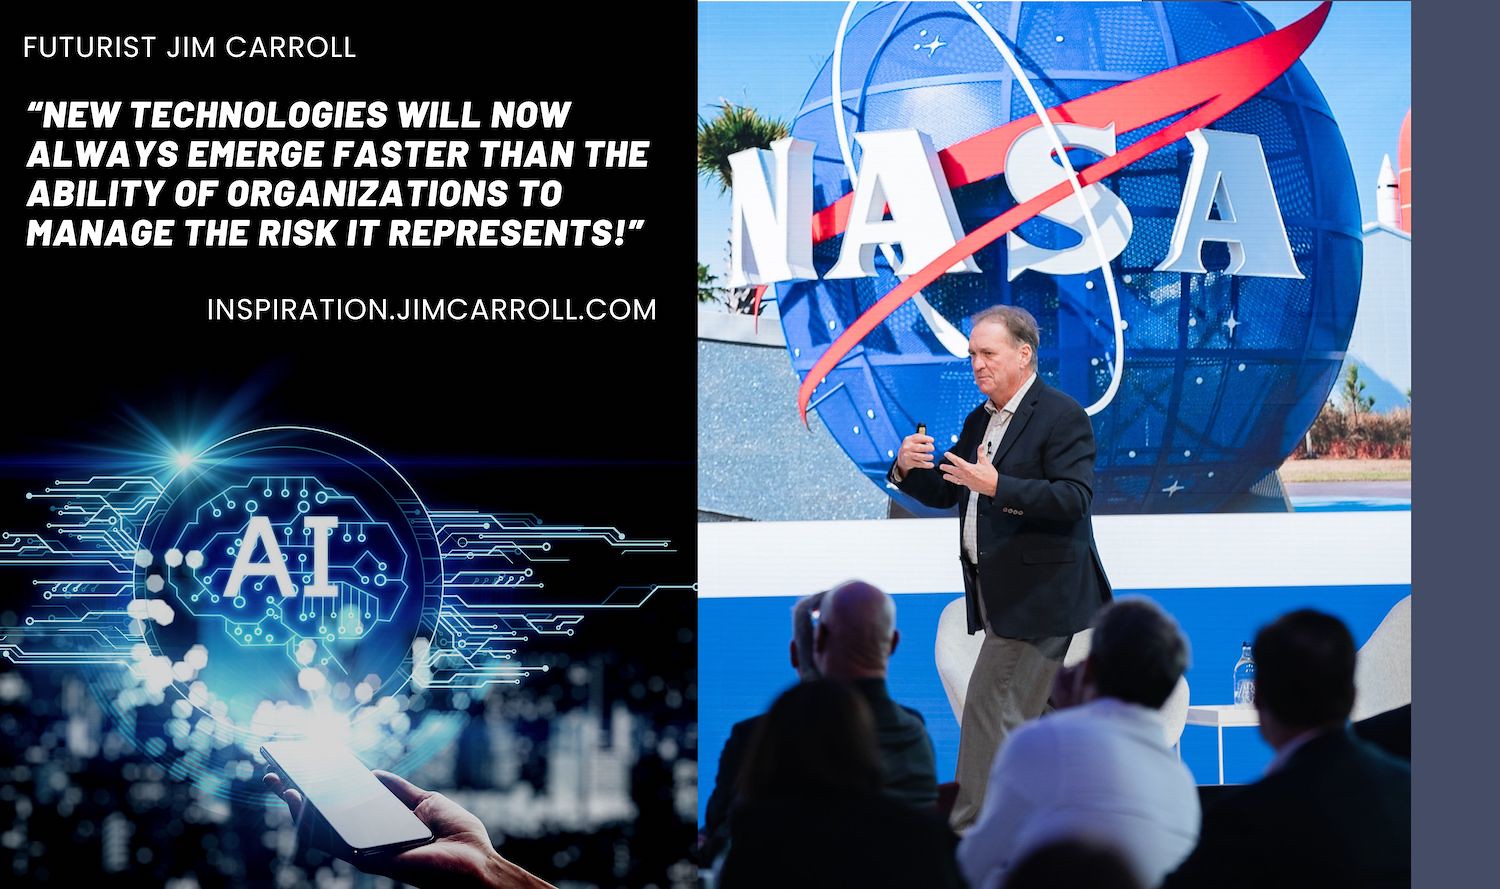 “Every new technology is ultimately used for a nefarious purpose, accelerating societal risk” - Futurist Jim Carroll